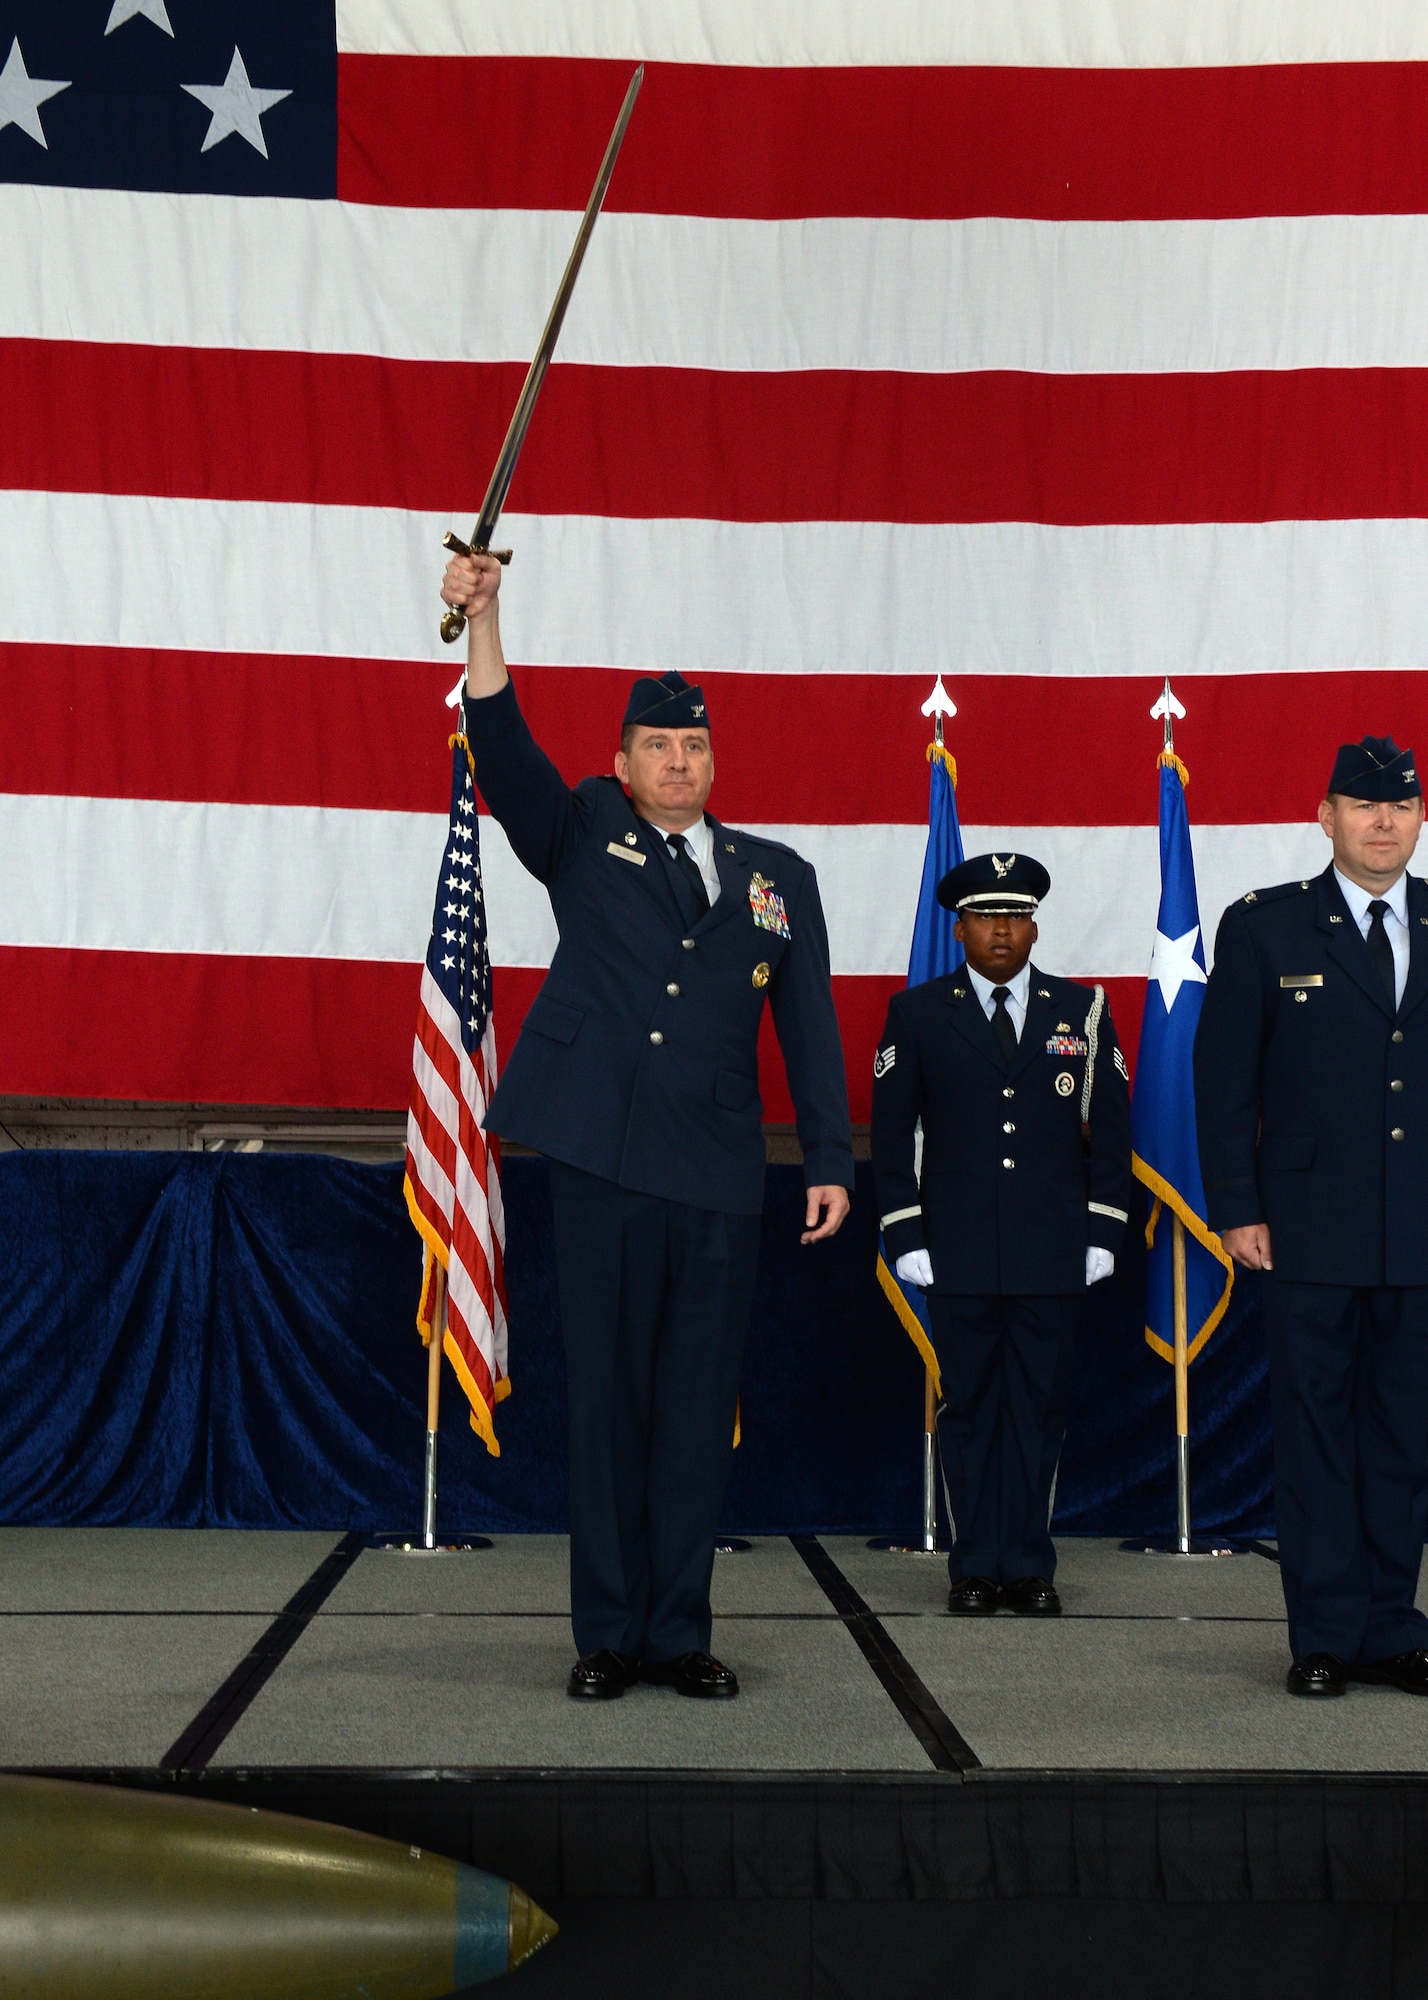 U.S. Air Force Col. Peter Bilodeau, 52nd Fighter Wing commander, raises a ceremonial saber during an assumption of command ceremony July 11, 2014, in Hangar 1 at Spangdahlem Air Base, Germany. U.S. Air Force Col. Lars Hubert, 52nd FW vice commander, presented the saber to Bilodeau in this tradition that dates back to the 1980s. (U.S. Air Force photo by Staff Sgt. Daryl Knee/Released)